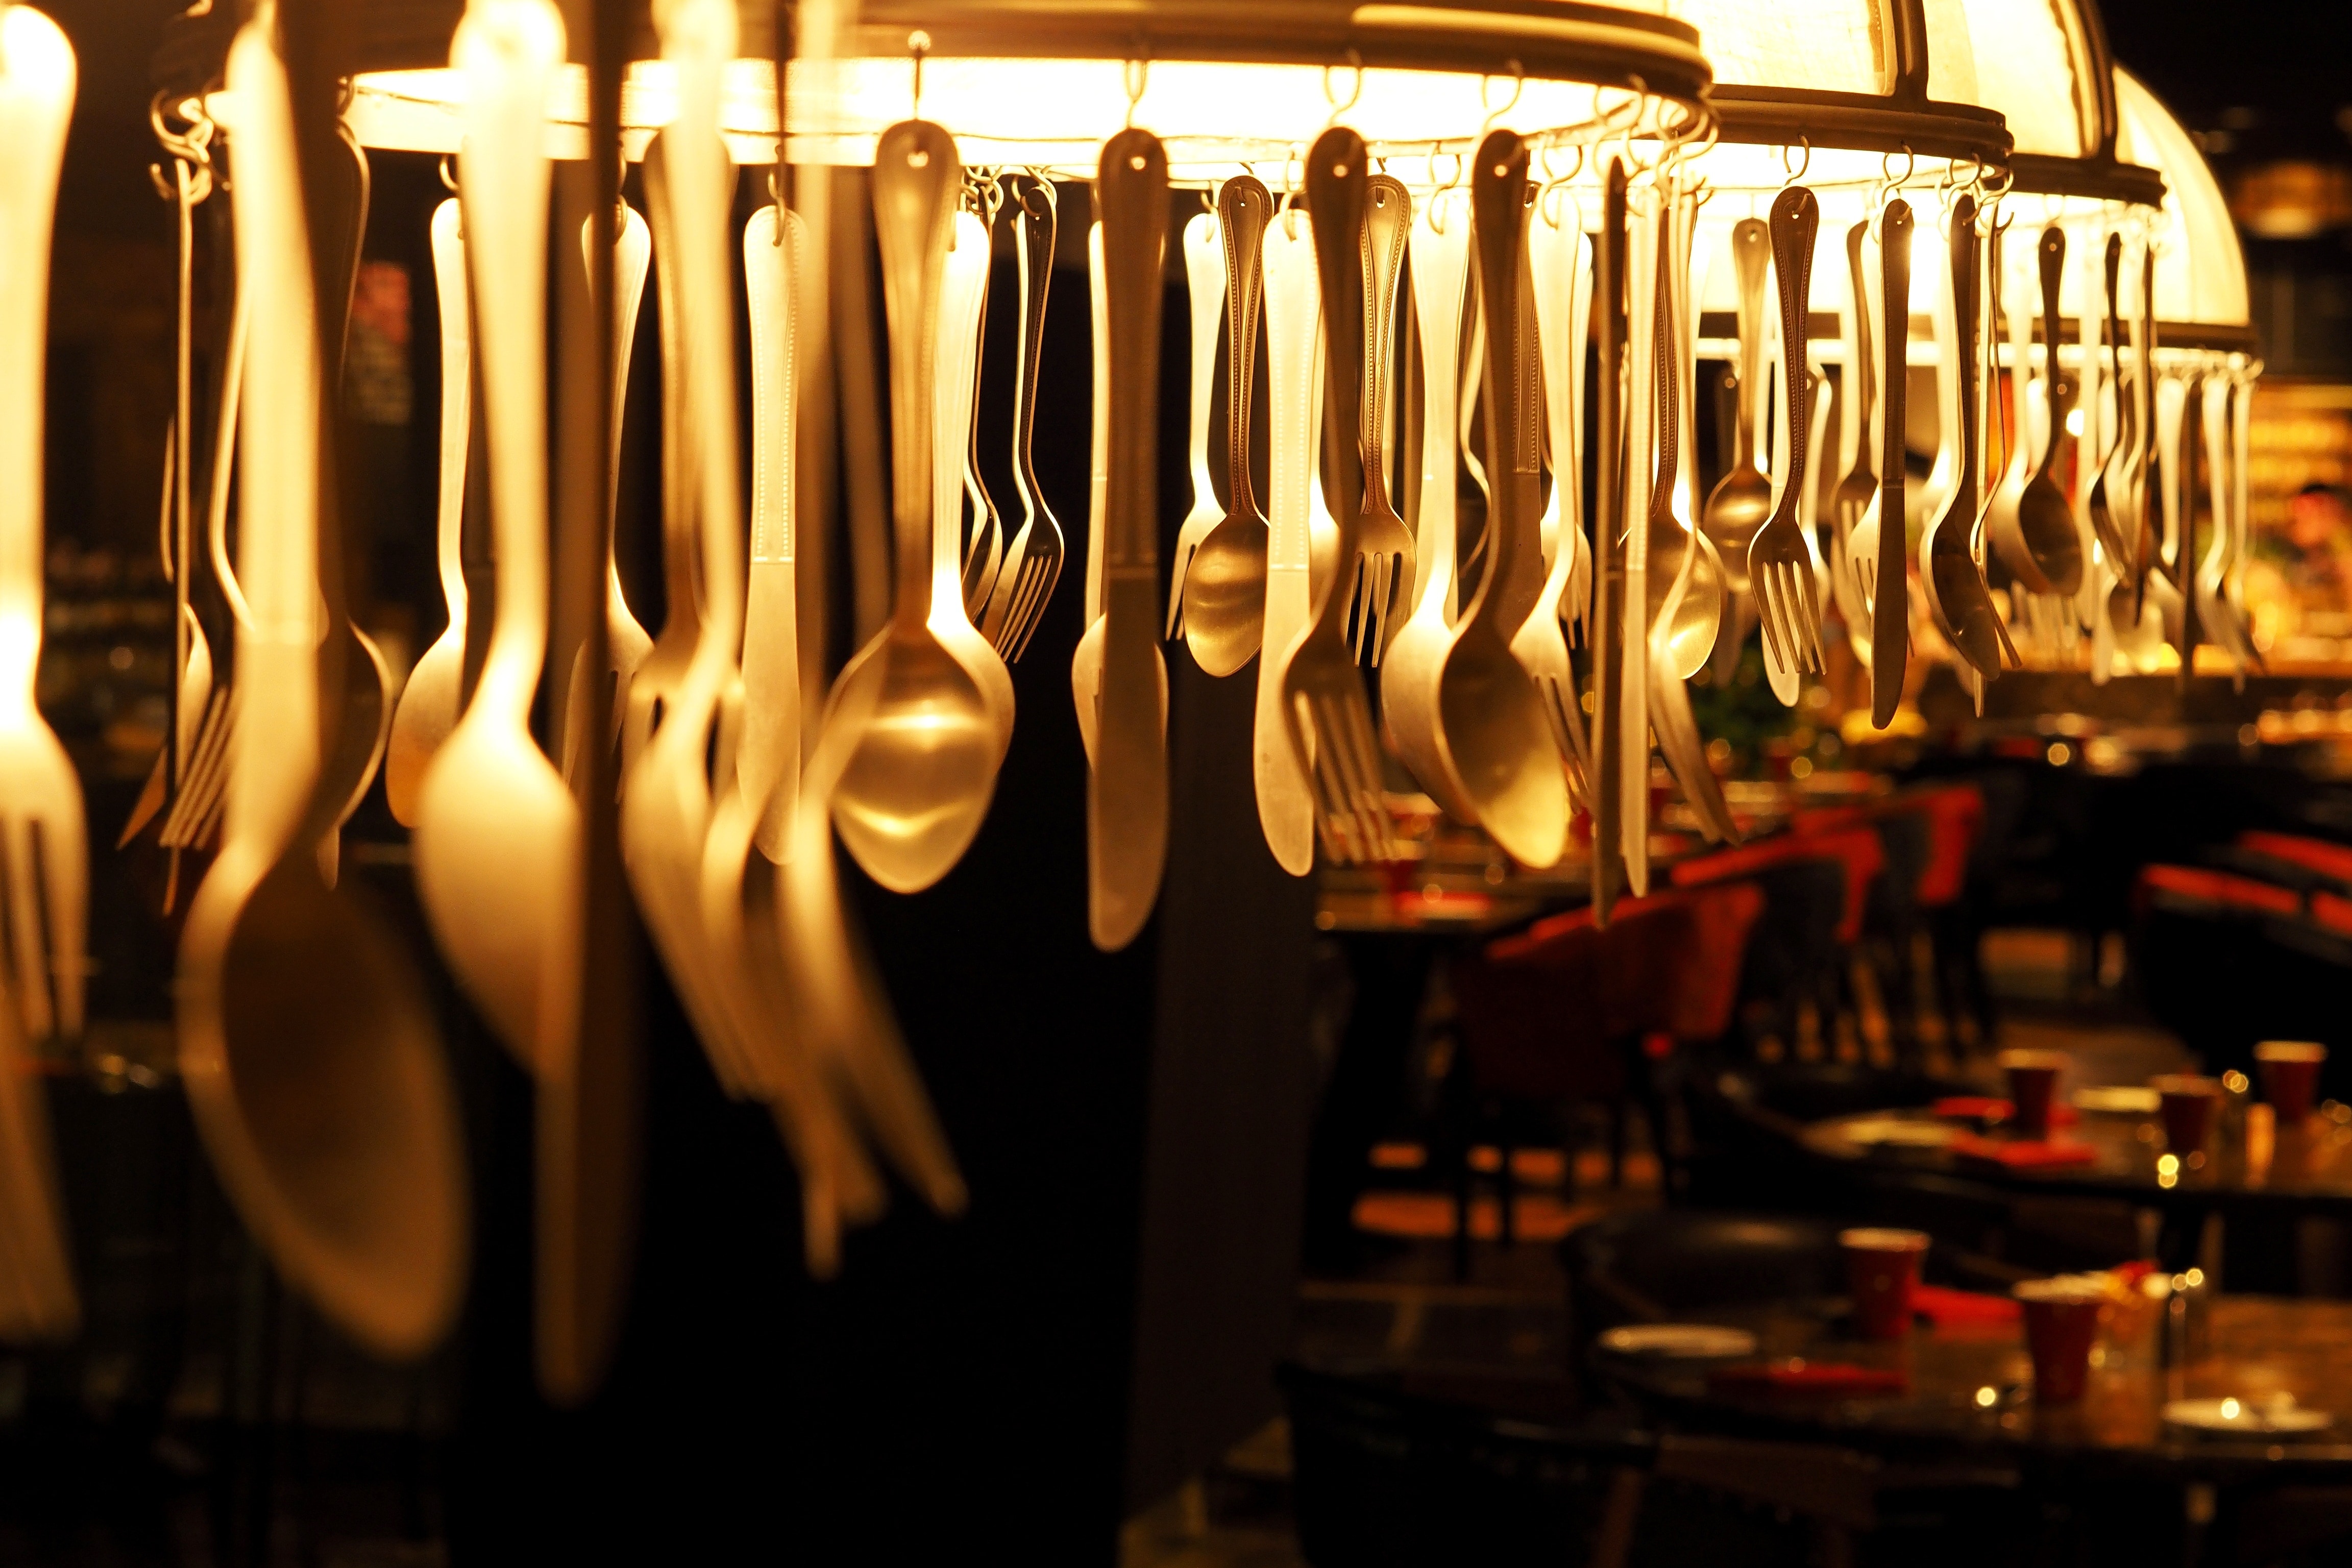 Fork, Spoon, Hanging, Lamps Utensils, in a row, hanging